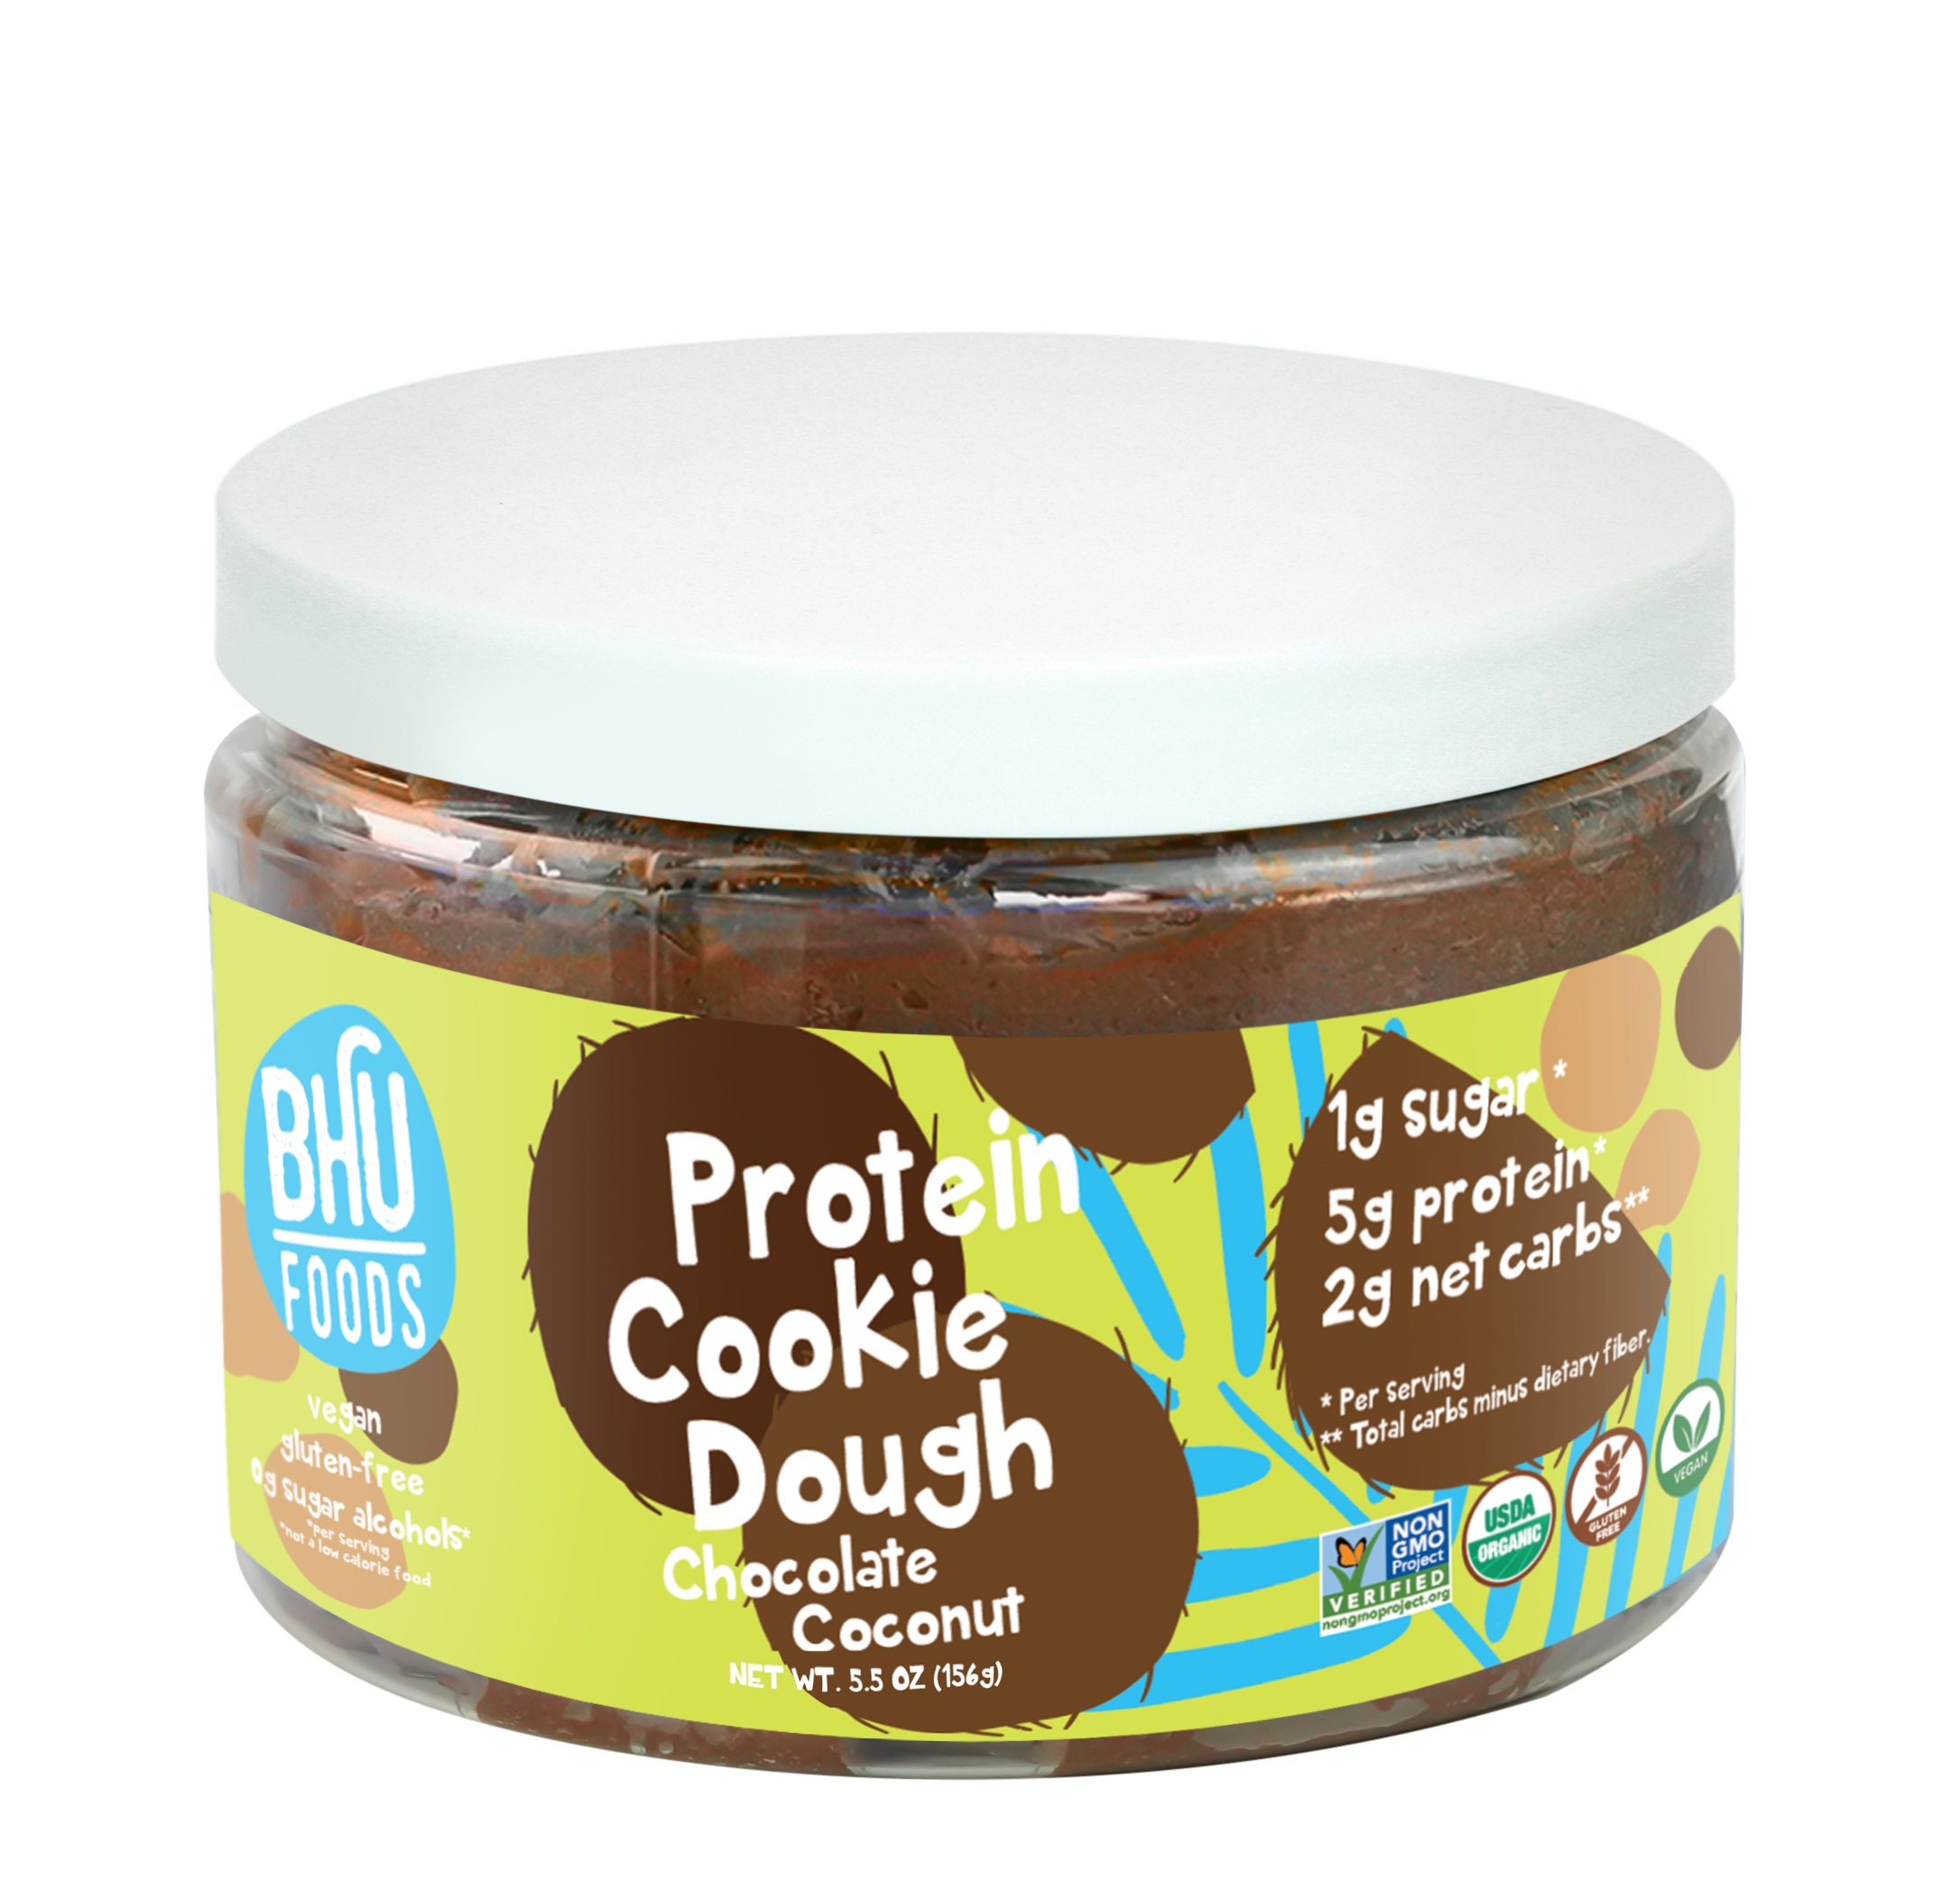 BHU Foods Protein Cookie Dough - Chocolate Coconut 6 units per case 5.5 oz